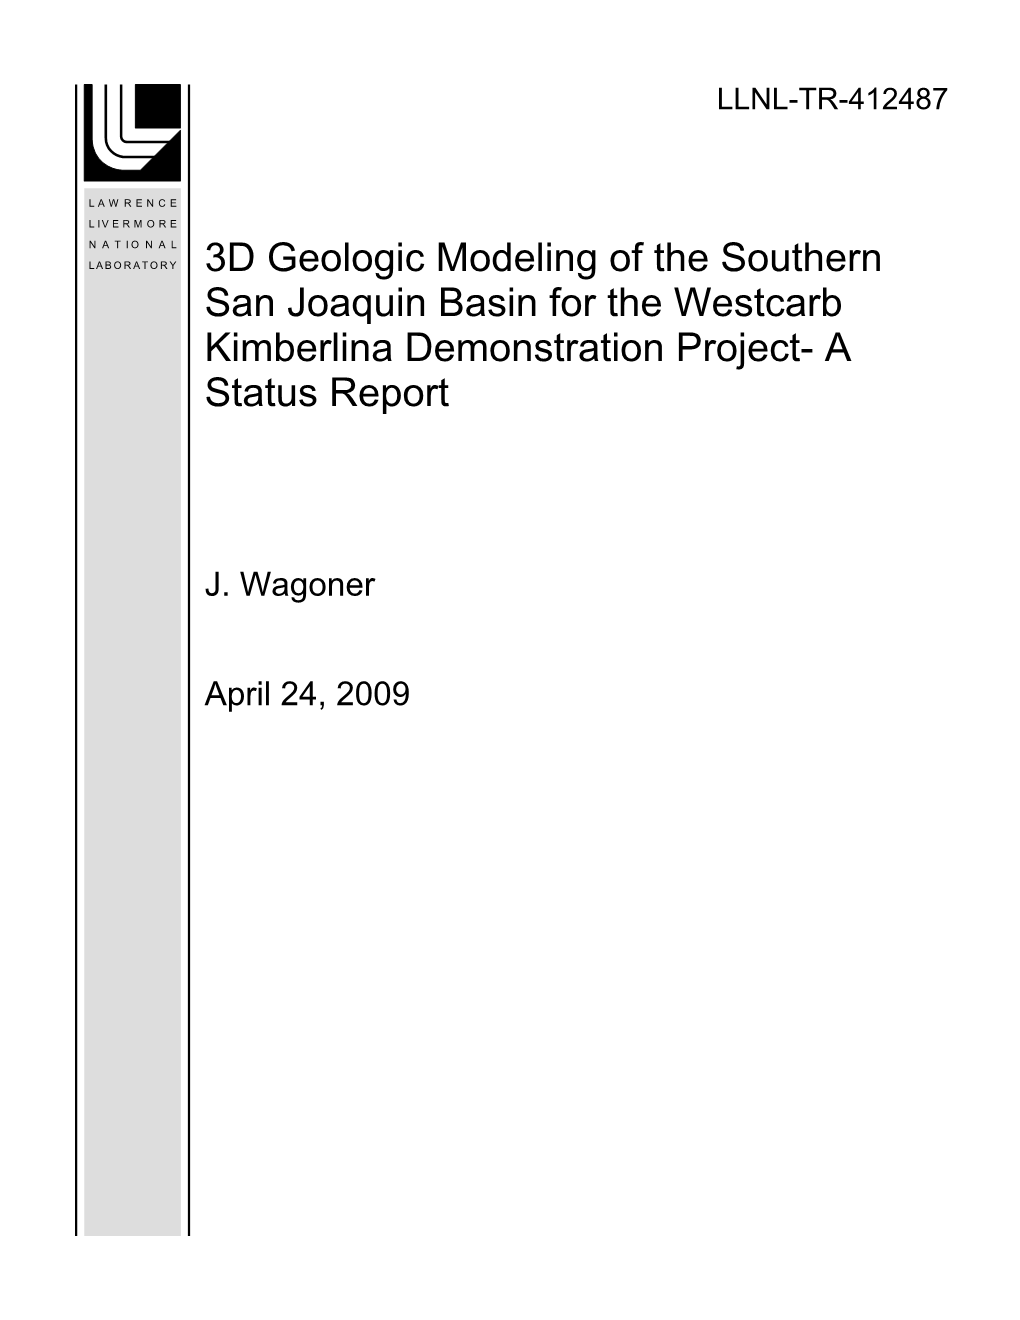 3D Geologic Modeling of the Southern San Joaquin Basin for the Westcarb Kimberlina Demonstration Project- a Status Report